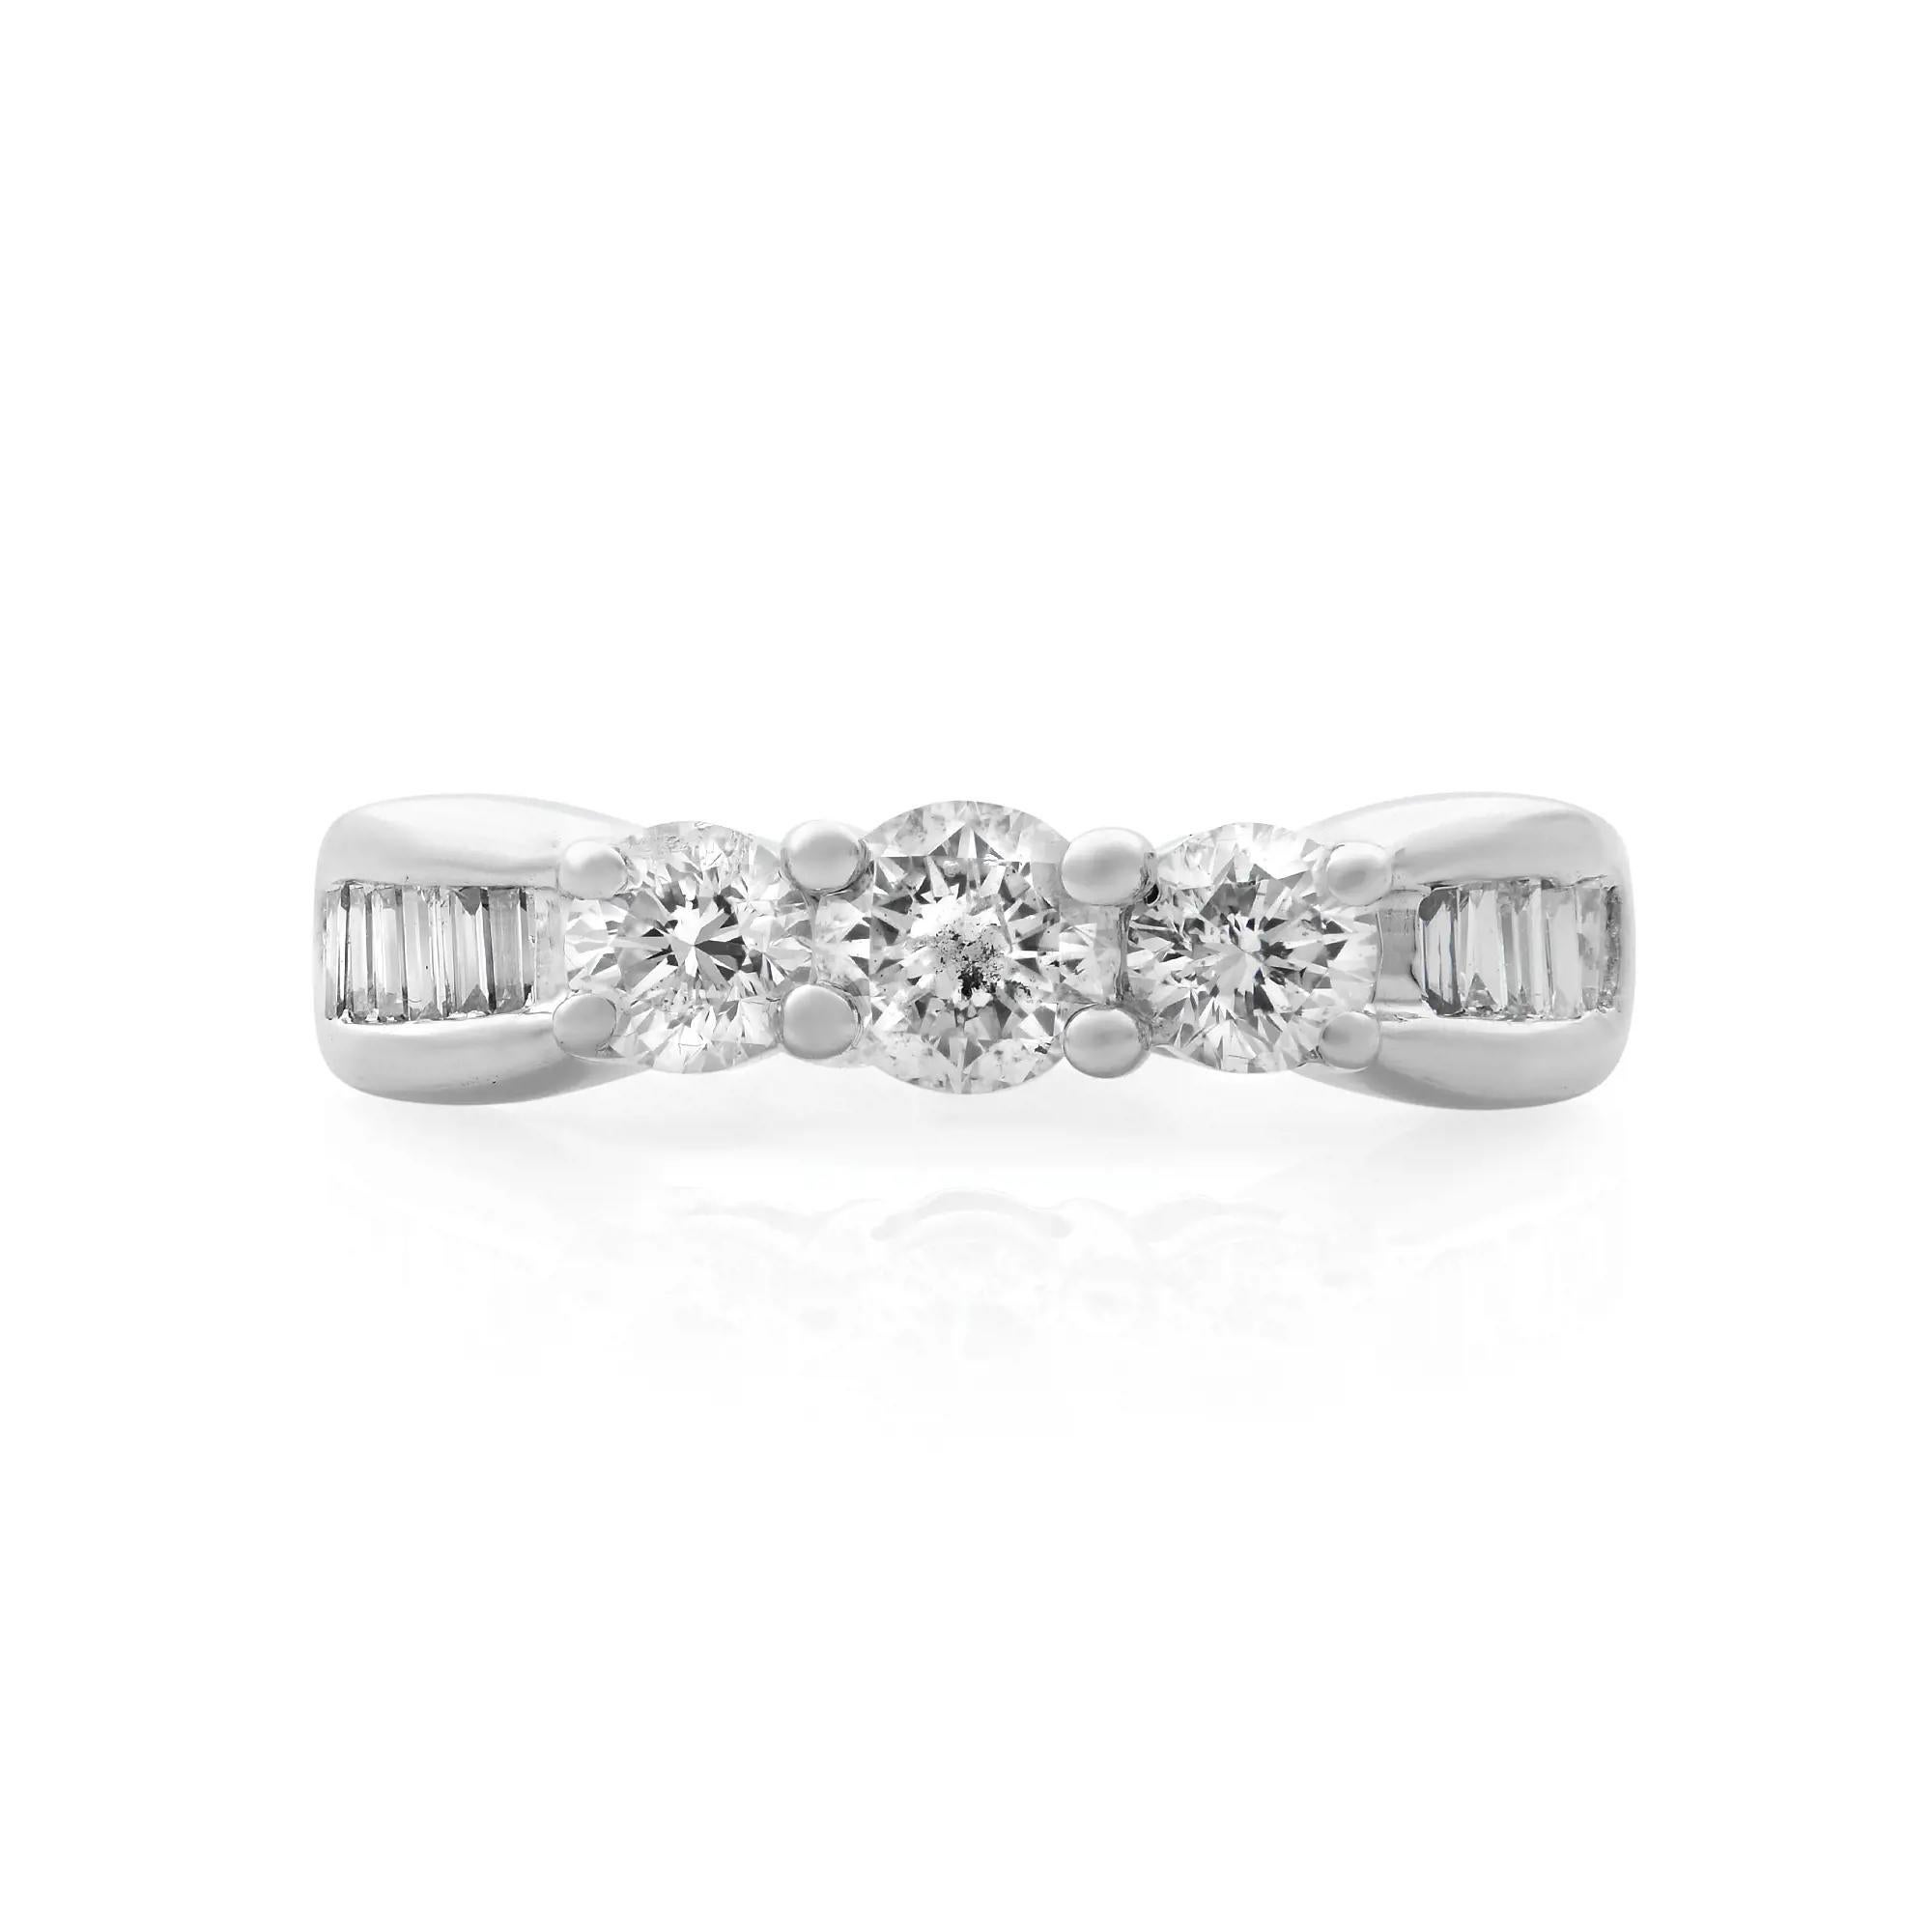 Classic and elegant diamond wedding band ring rendered in highly polished 14K white gold. This ring features perfectly matched 3 prong set sparkling round brilliant cut diamonds in the center with baguette cut diamonds on both sides. Total diamond